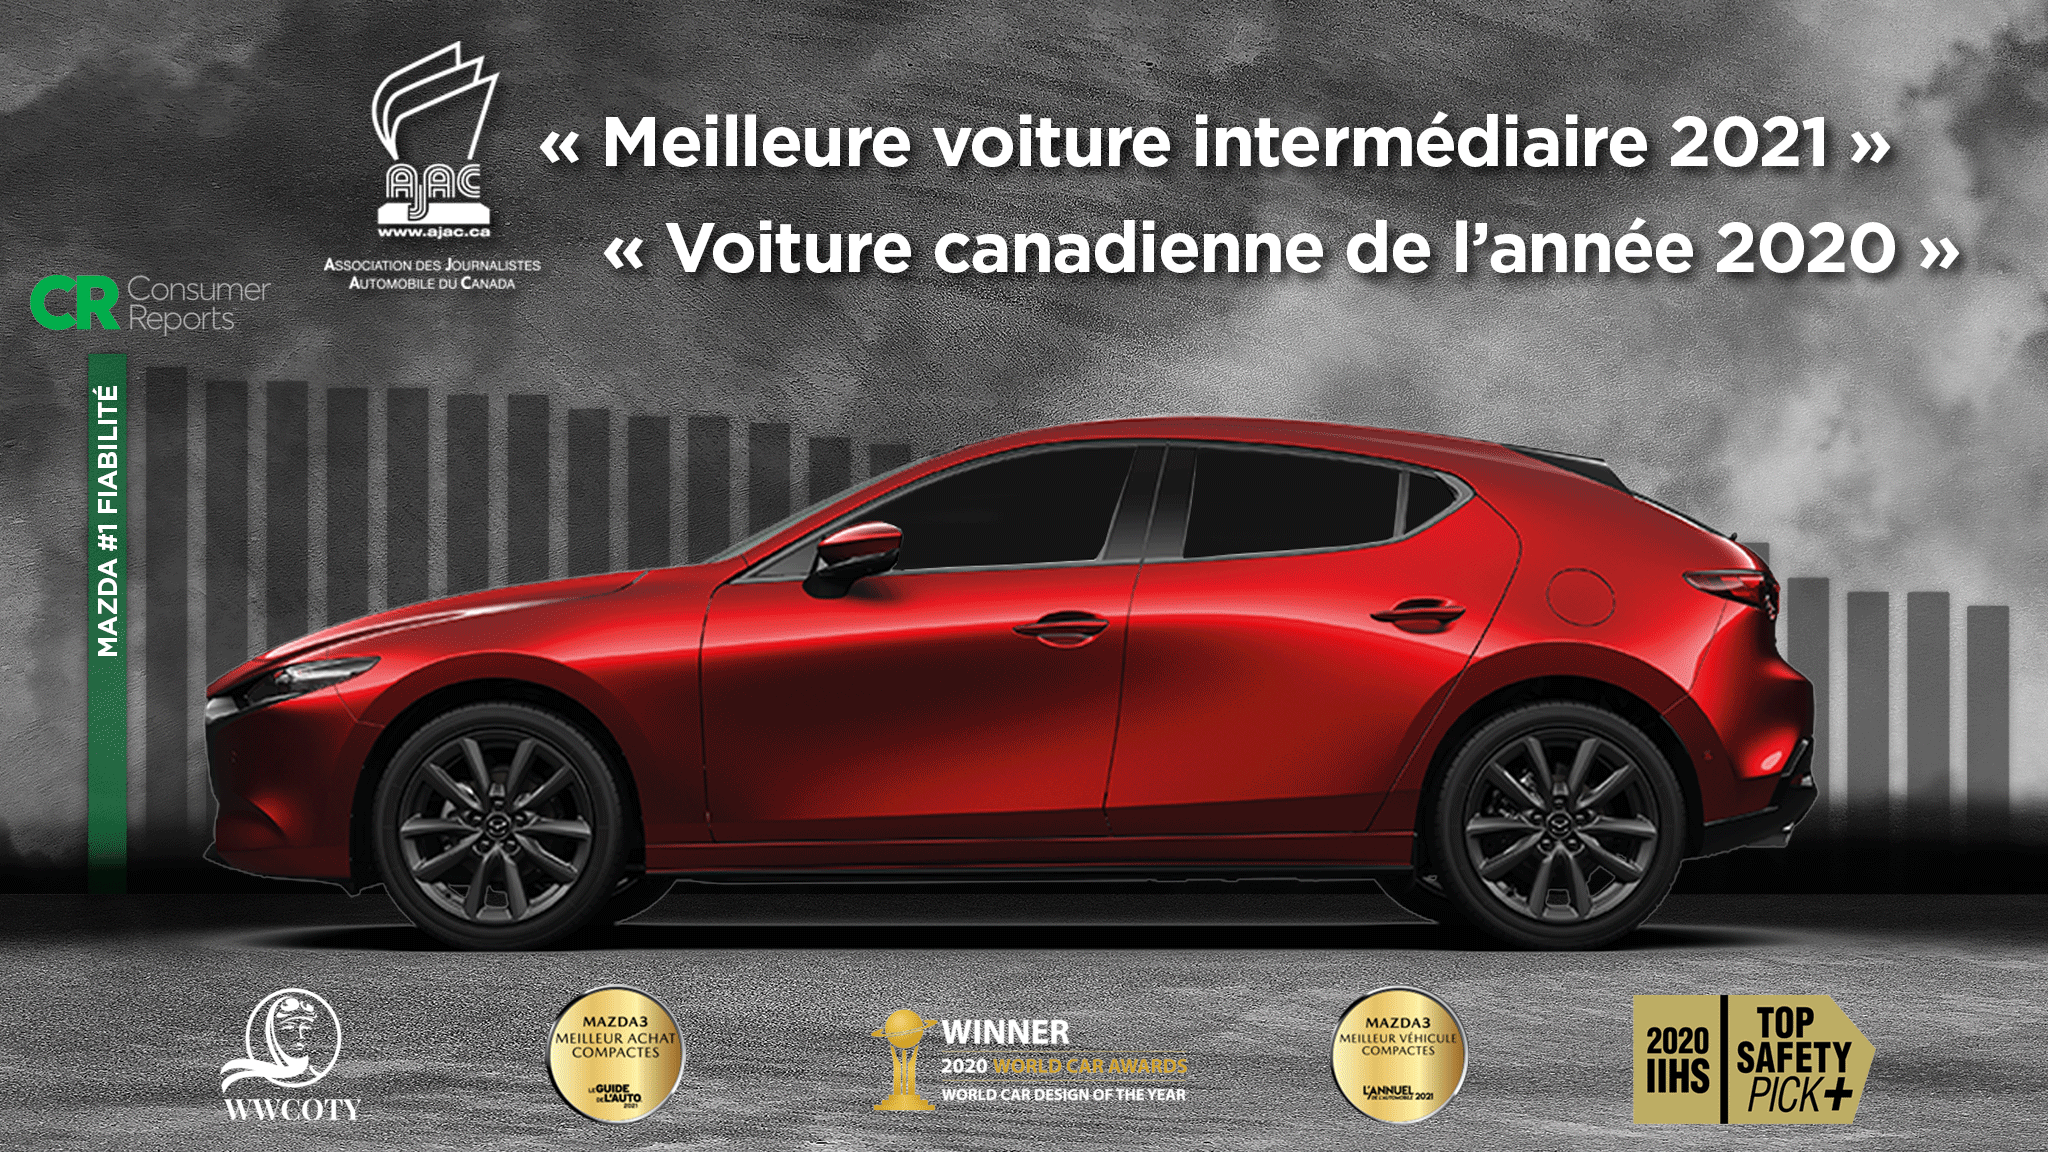 https://www.groupebeaucage.com/wp-content/uploads/sites/15/2021/02/groupe-beaucage-article-mazda3-2021-ajac-header.png